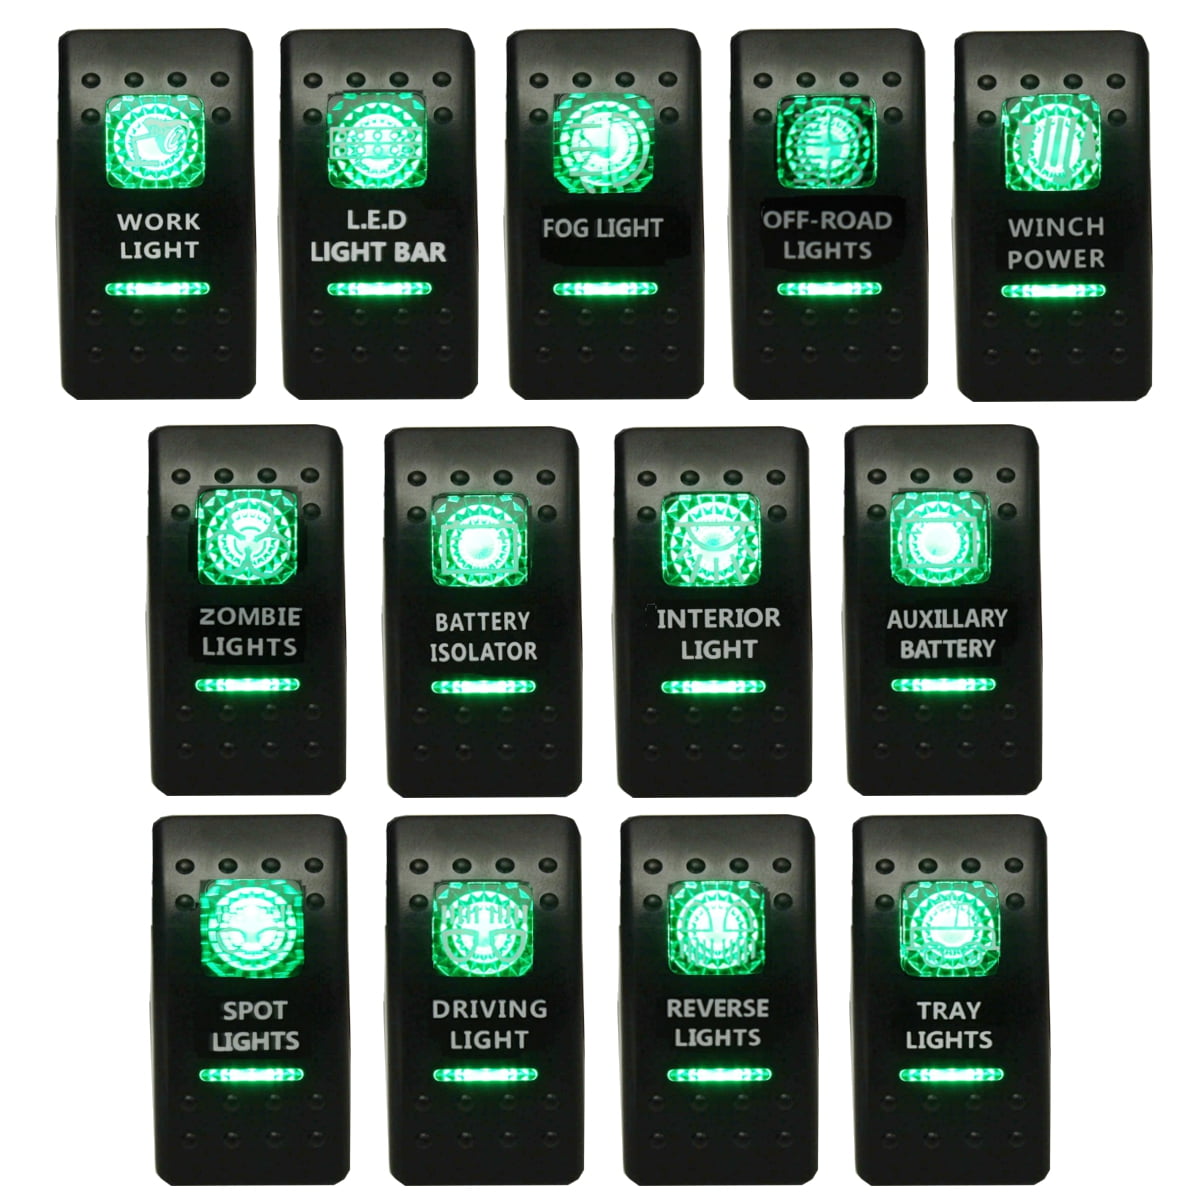 Waterproof Marine Rated Green LED On/Off Rocker Switch Boat Car Truck Dome Light